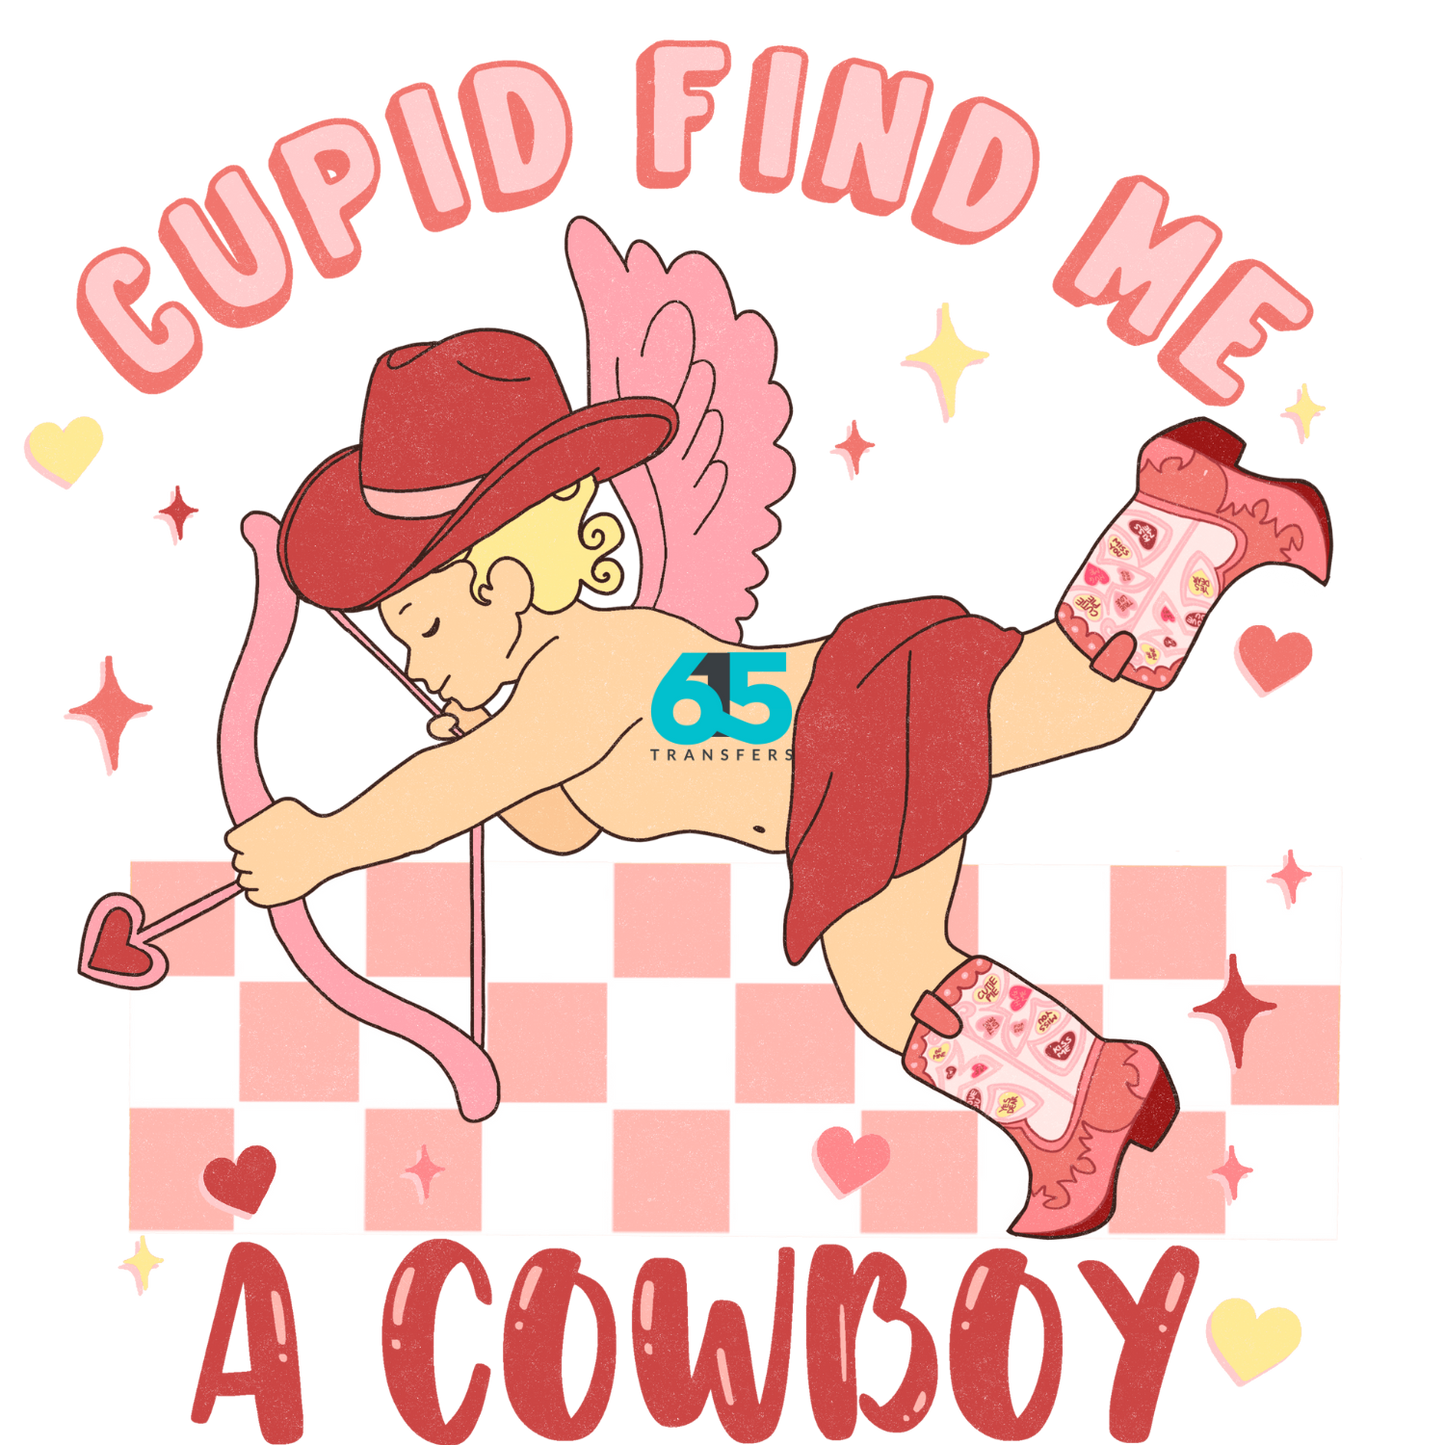 Cupid Find Me a Cowboy (RTP- Ready to Print)